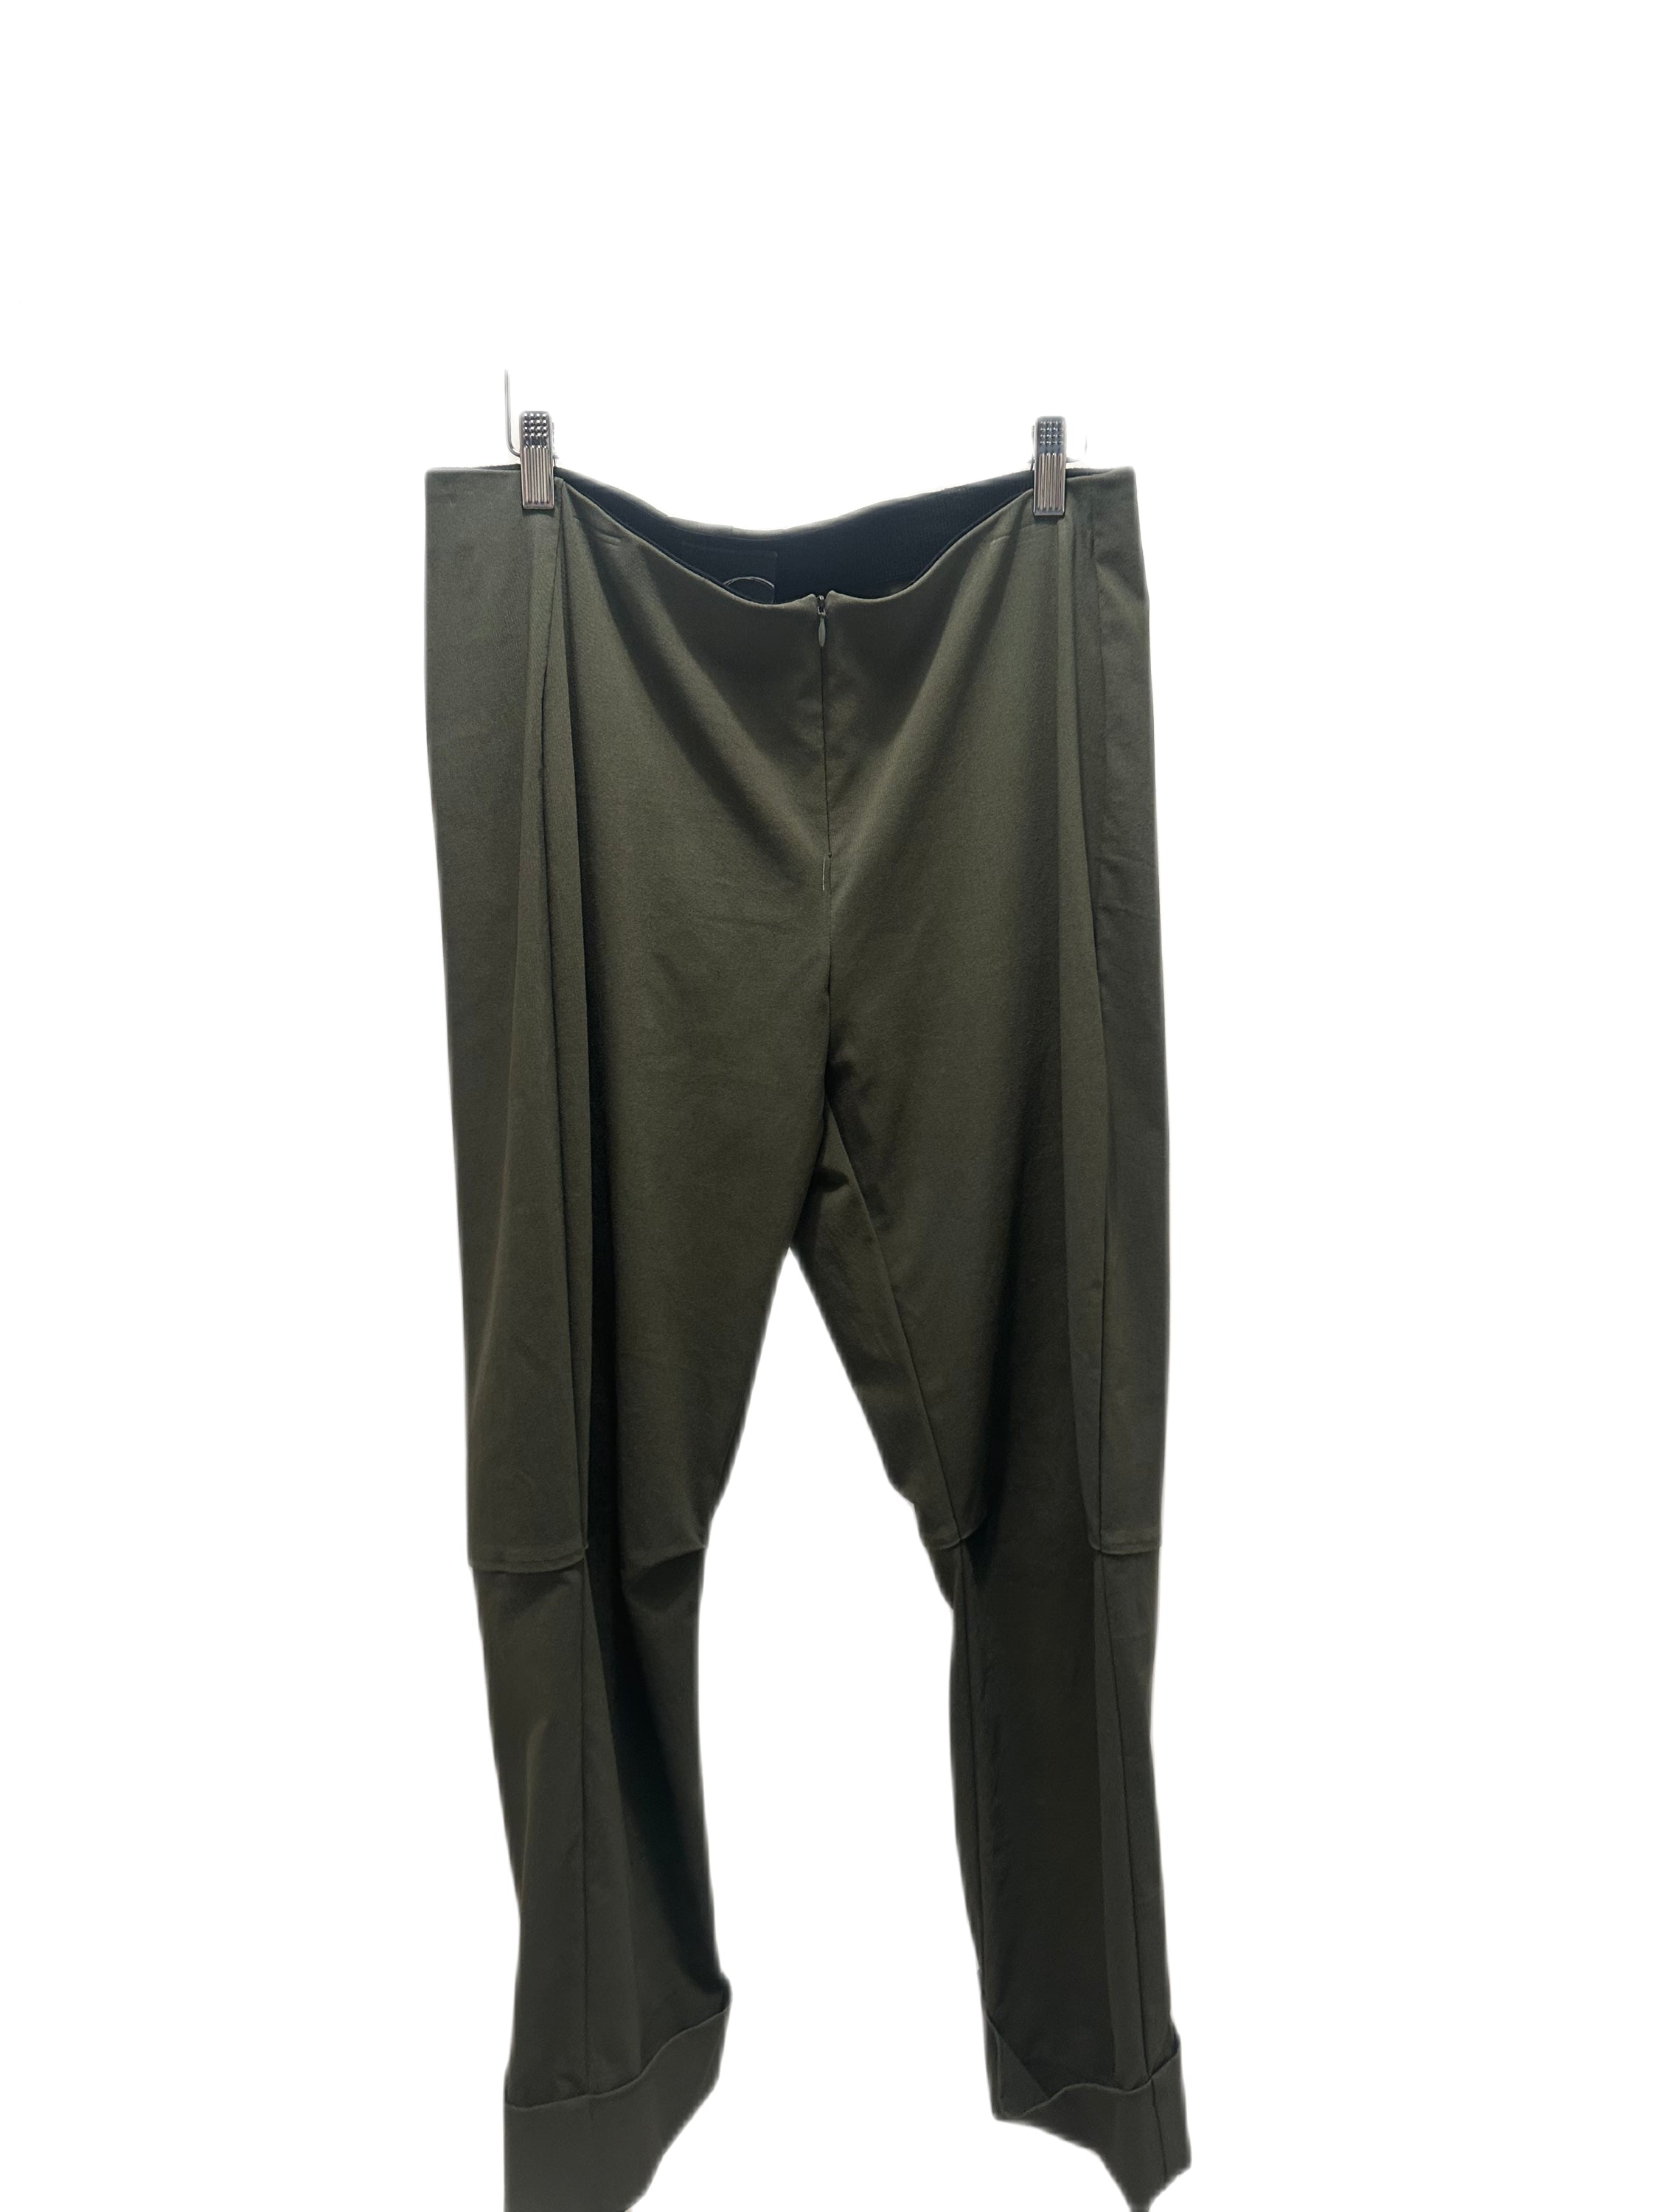 Porto army green pant - clever alice